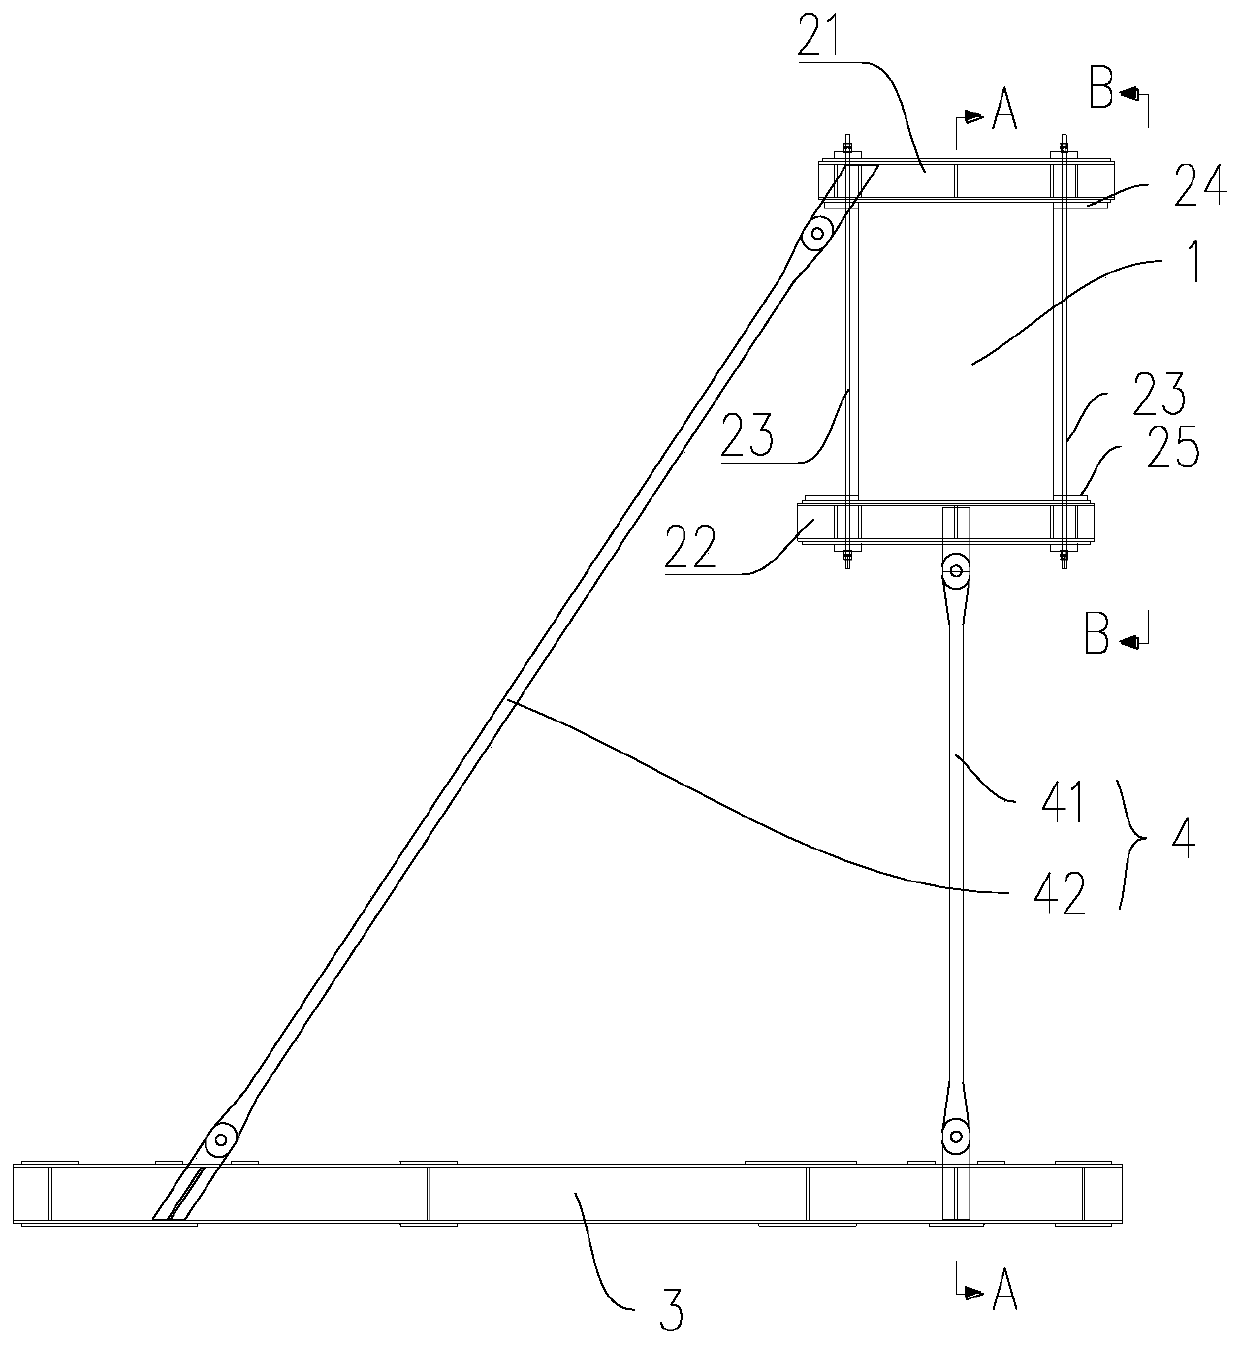 Existing line protective shed frame, protective shred and mounting method